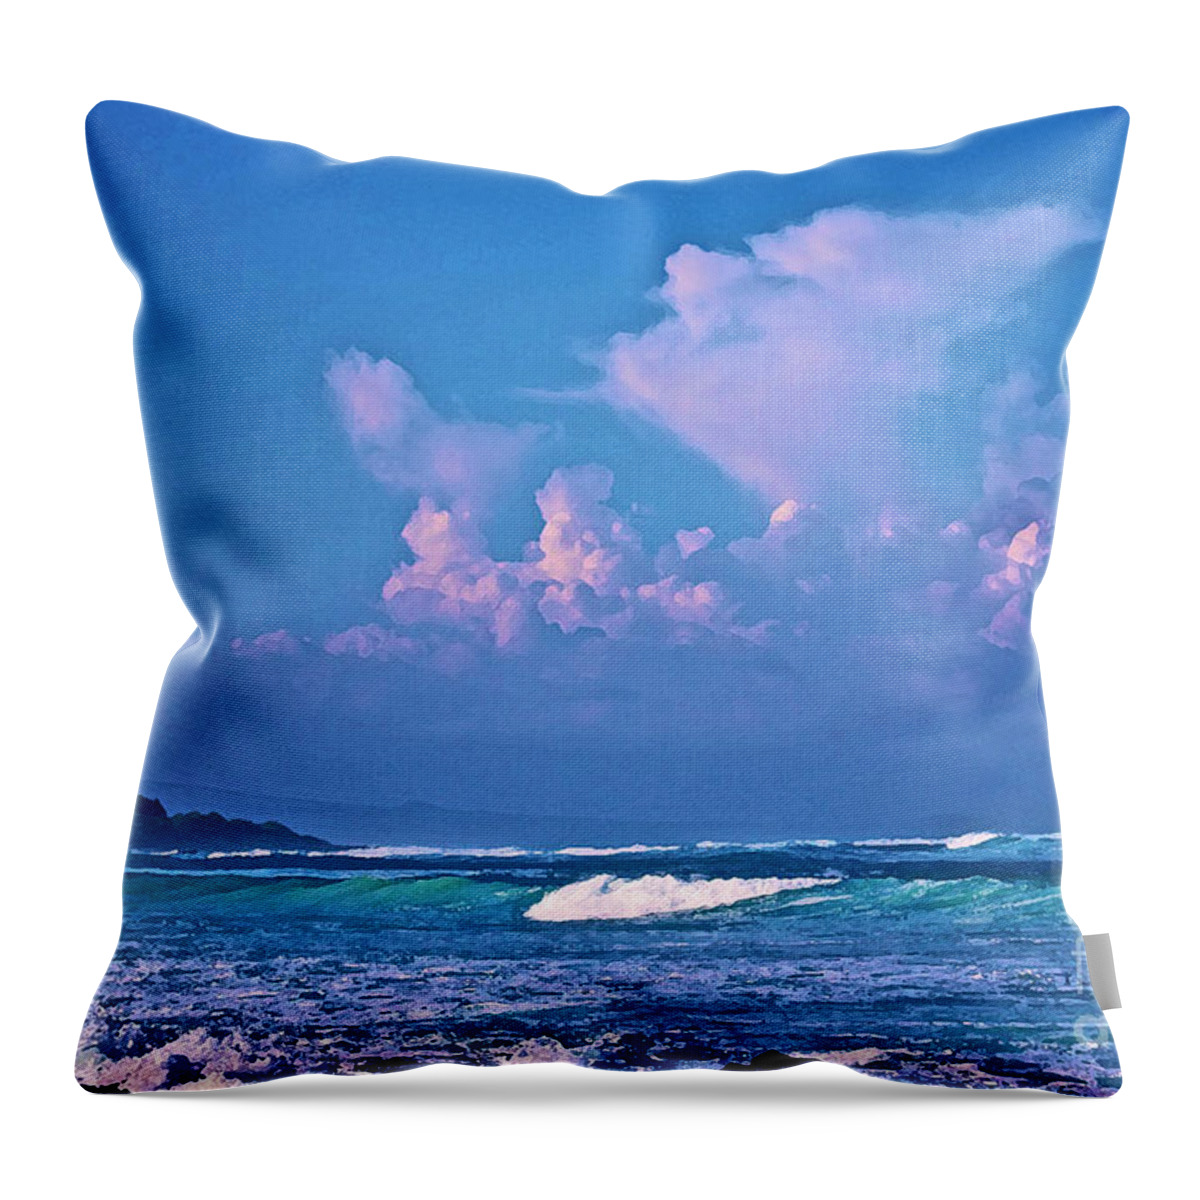 Hawaiian Seascape Throw Pillow featuring the photograph Anaeho'omalu Waves and Clouds by Bette Phelan